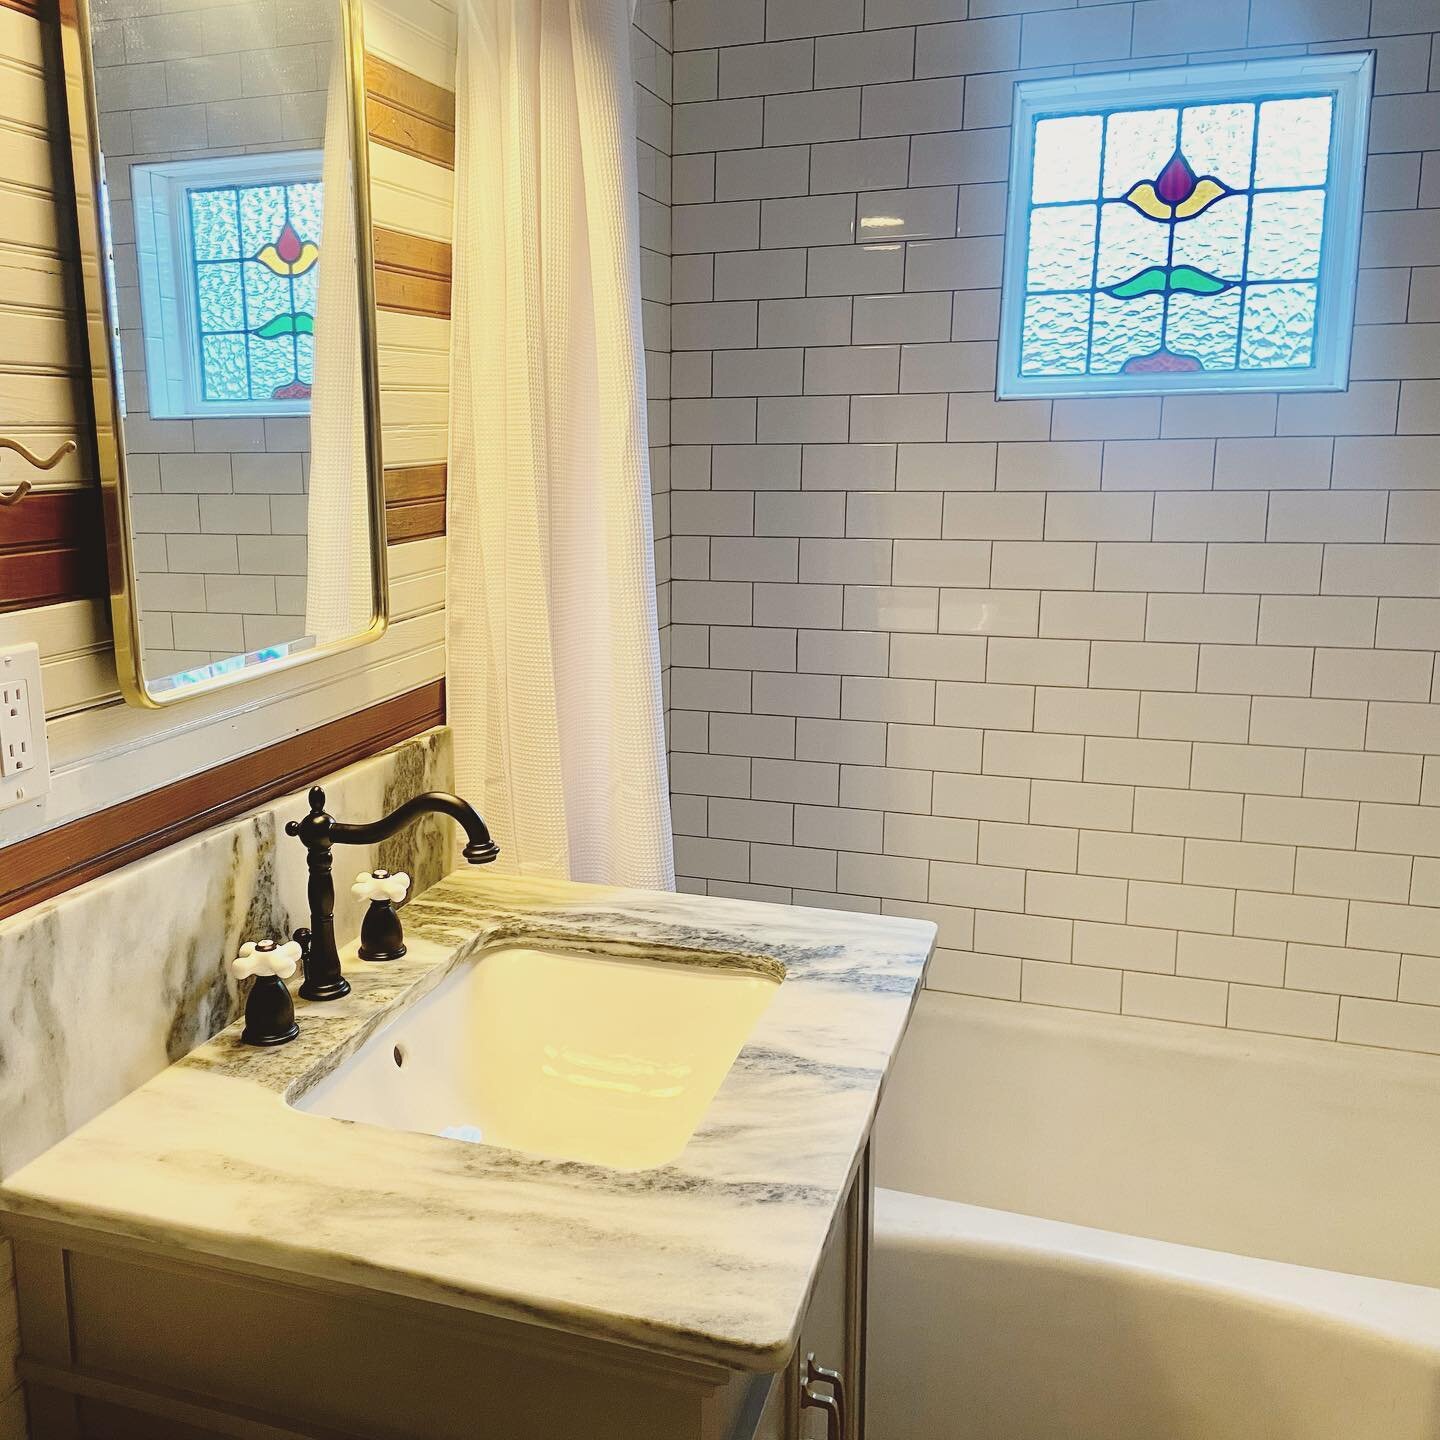 And we have a faucet! Some caulk and touch-up paint and this bathroom is done #atlonglast #victorianrenovation #victorianbathroom #bathroomfaucet #marble #stainedglass #subwaytile #brass #beadboard #naturalwood #vintagetub #reclaimedmaterials #oldhou